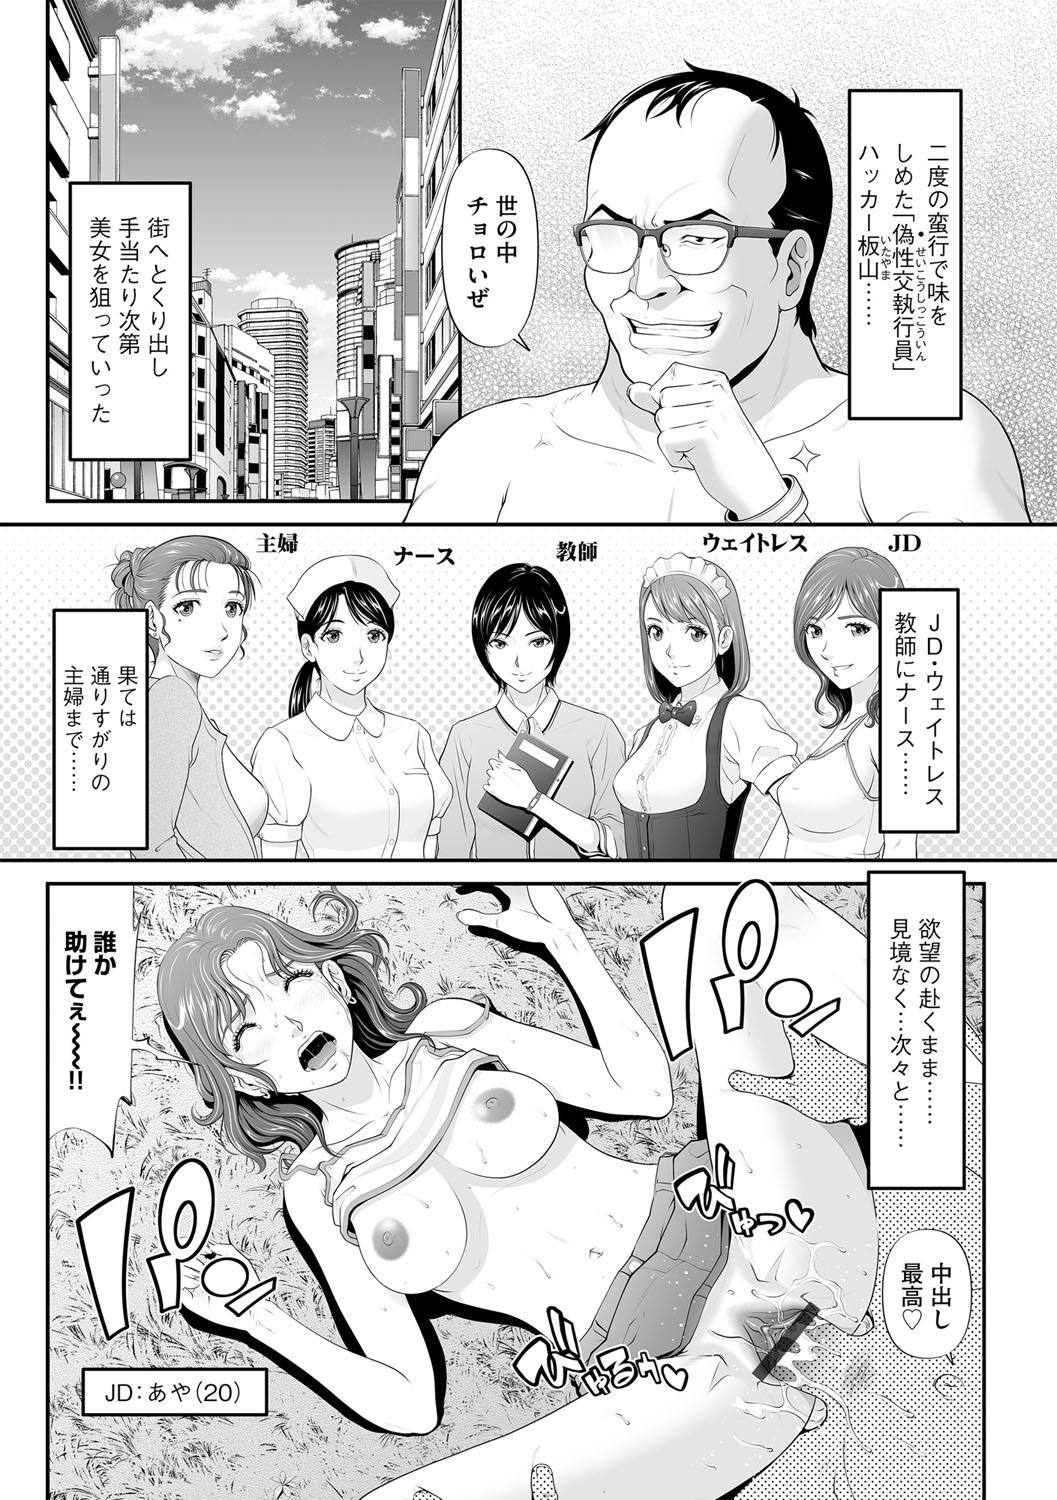 Nudes G-Edge Vol.015 Leaked - Page 8